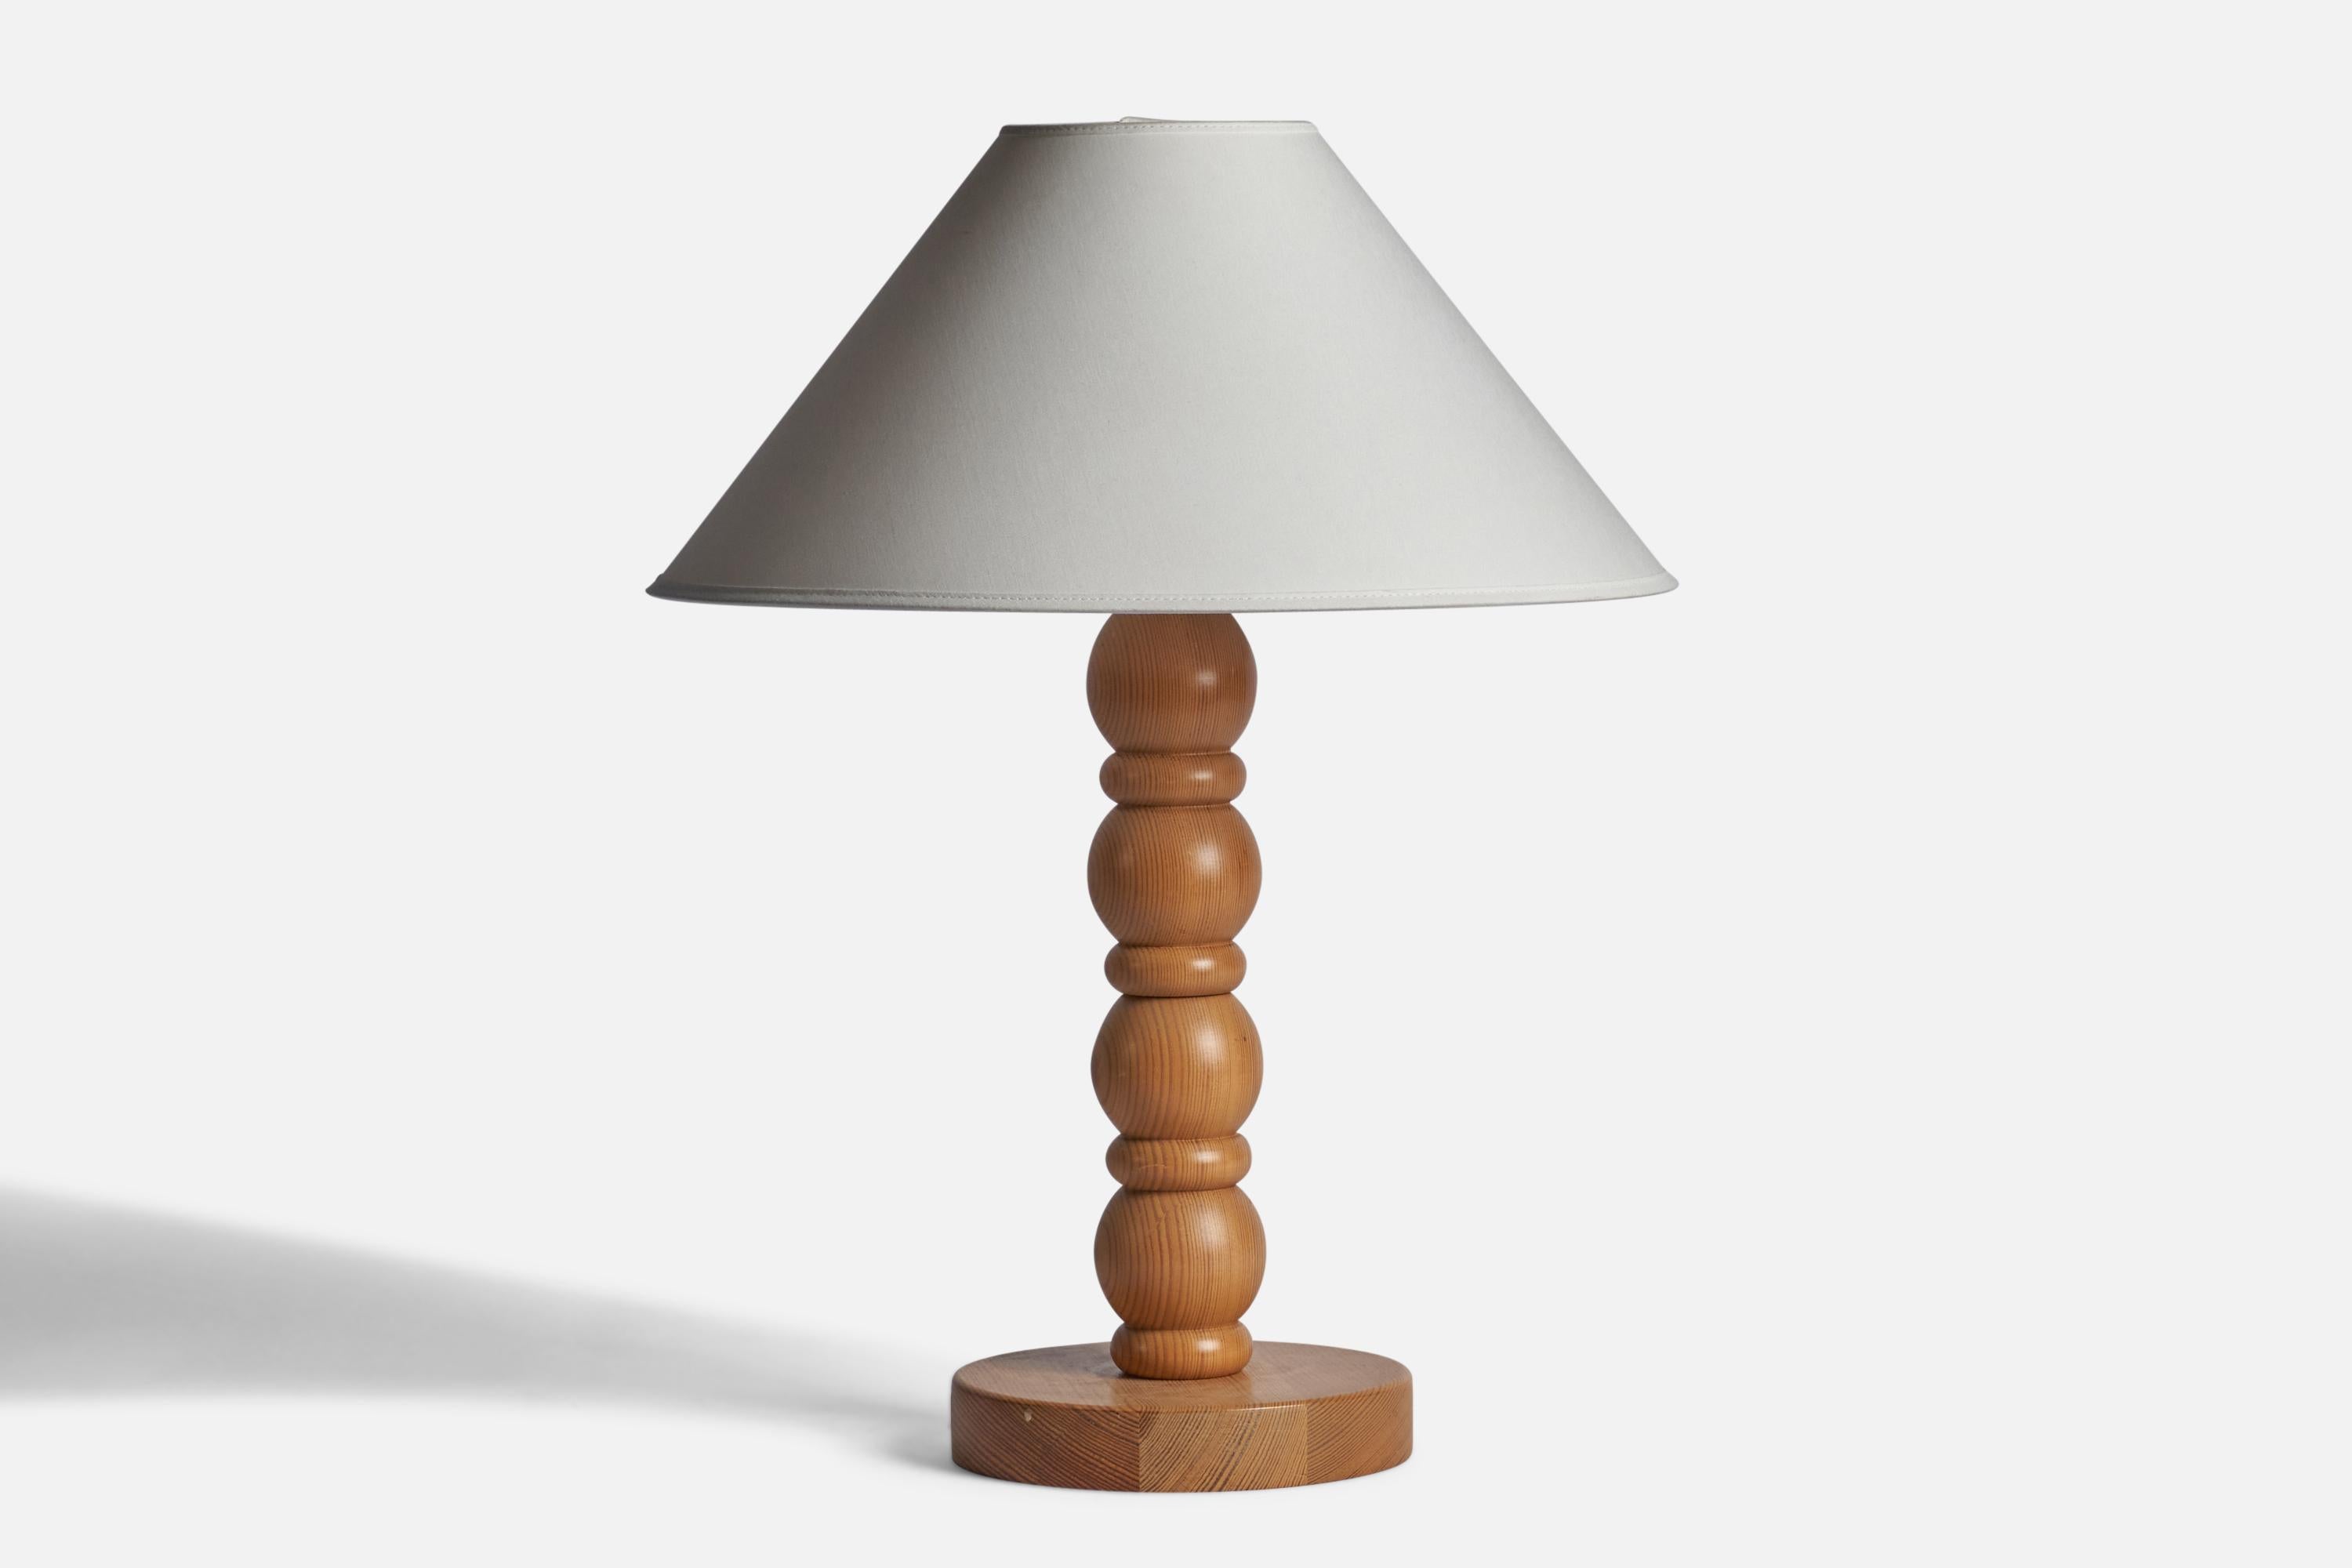 A pine table lamp designed and produced in Sweden, 1970s.

Dimensions of Lamp (inches): 15.75” H x 7” Diameter
Dimensions of Shade (inches): 4.5” Top Diameter x 16” Bottom Diameter x 9” H 
Dimensions of Lamp with Shade (inches): 22” H x 16”